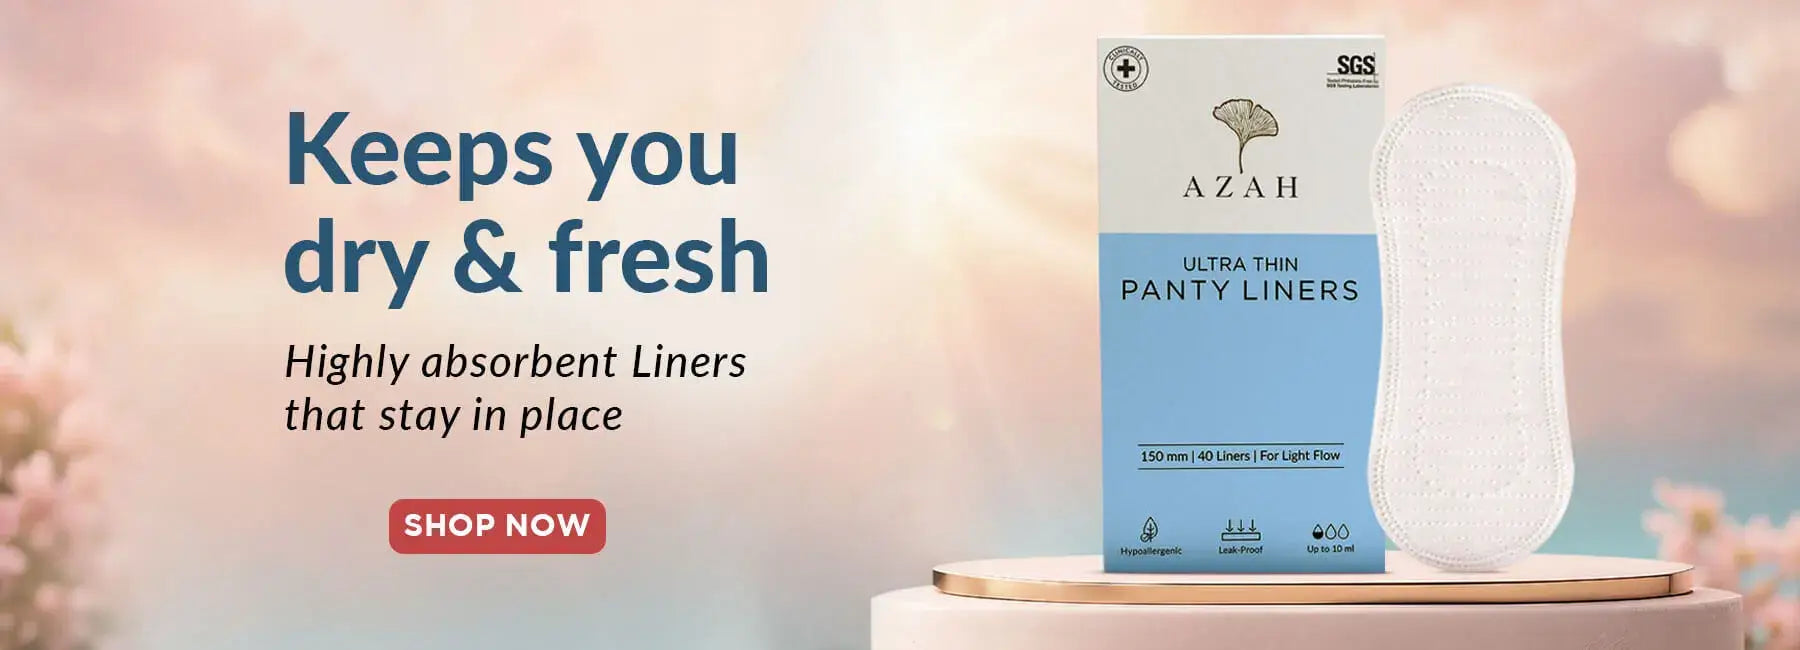 Ultra Thin Panty Liners -Keep you dry and fresh